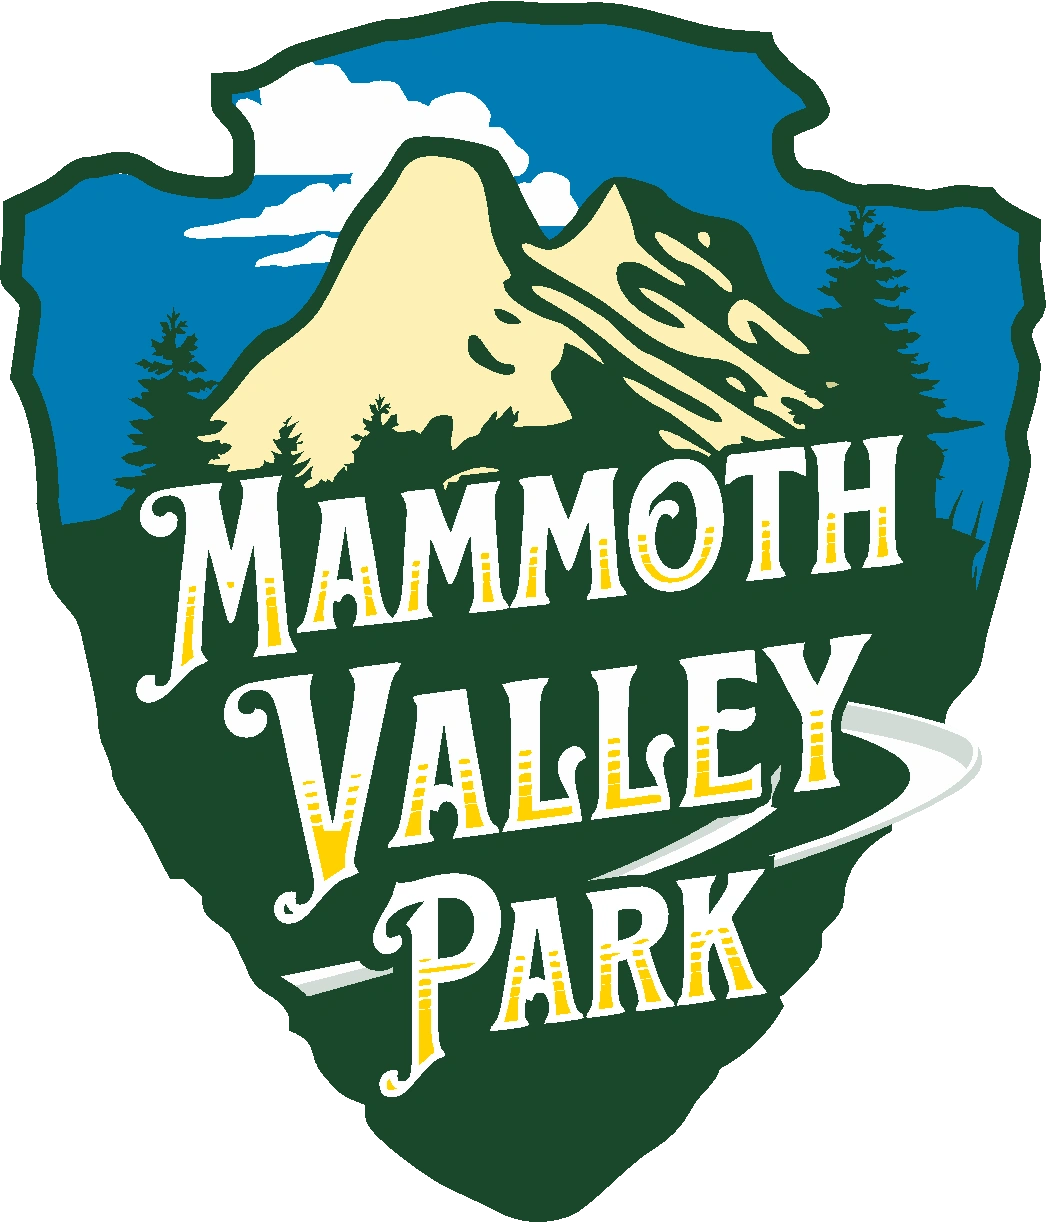 Mammoth Valley Park picture image